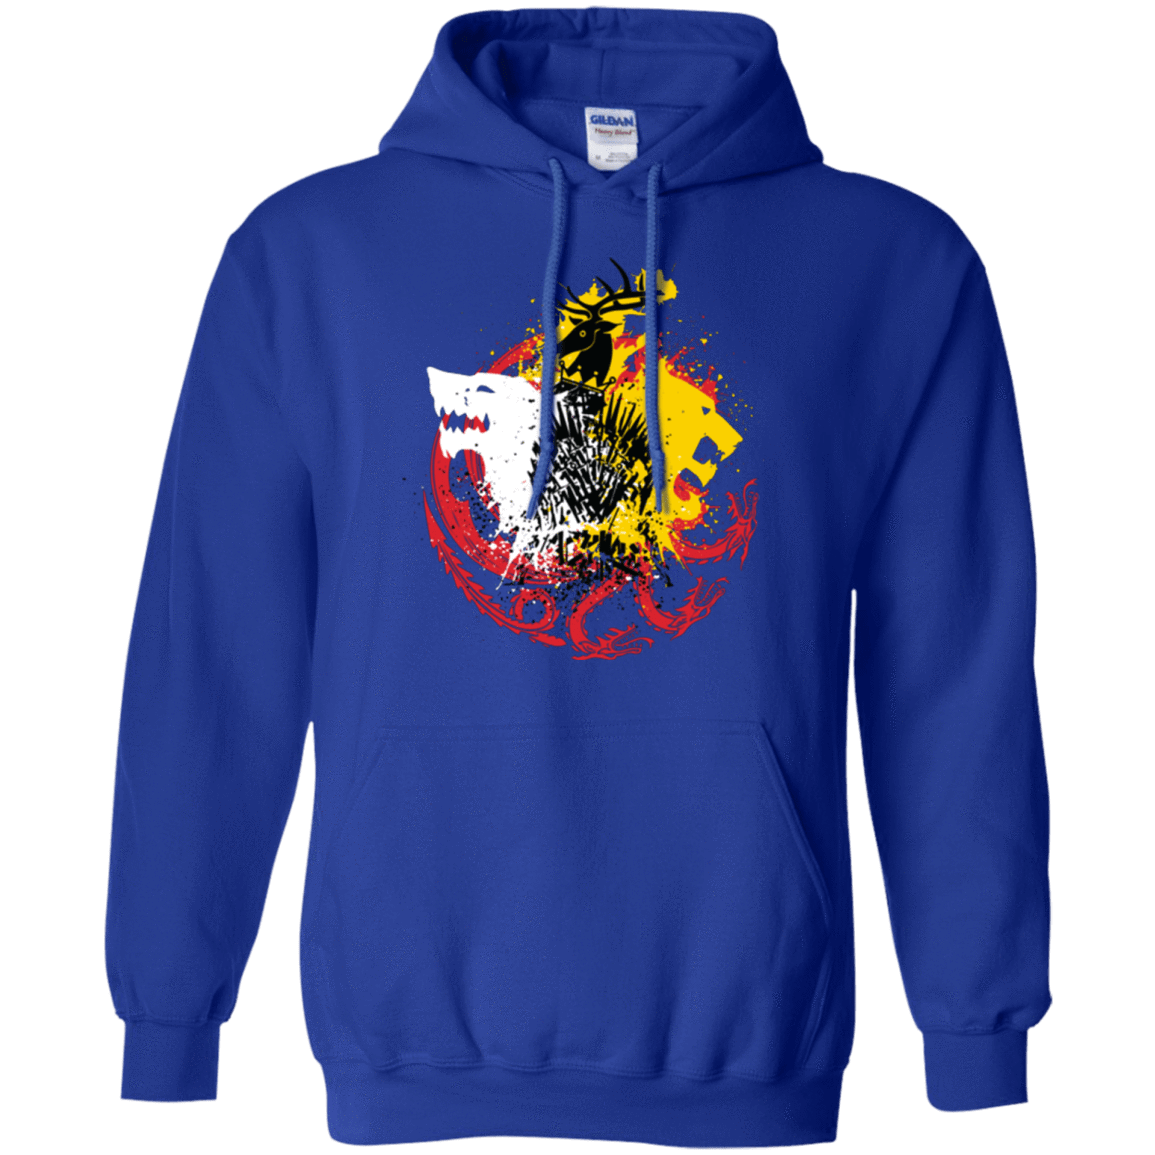 Sweatshirts Royal / Small GAME OF COLORS Pullover Hoodie